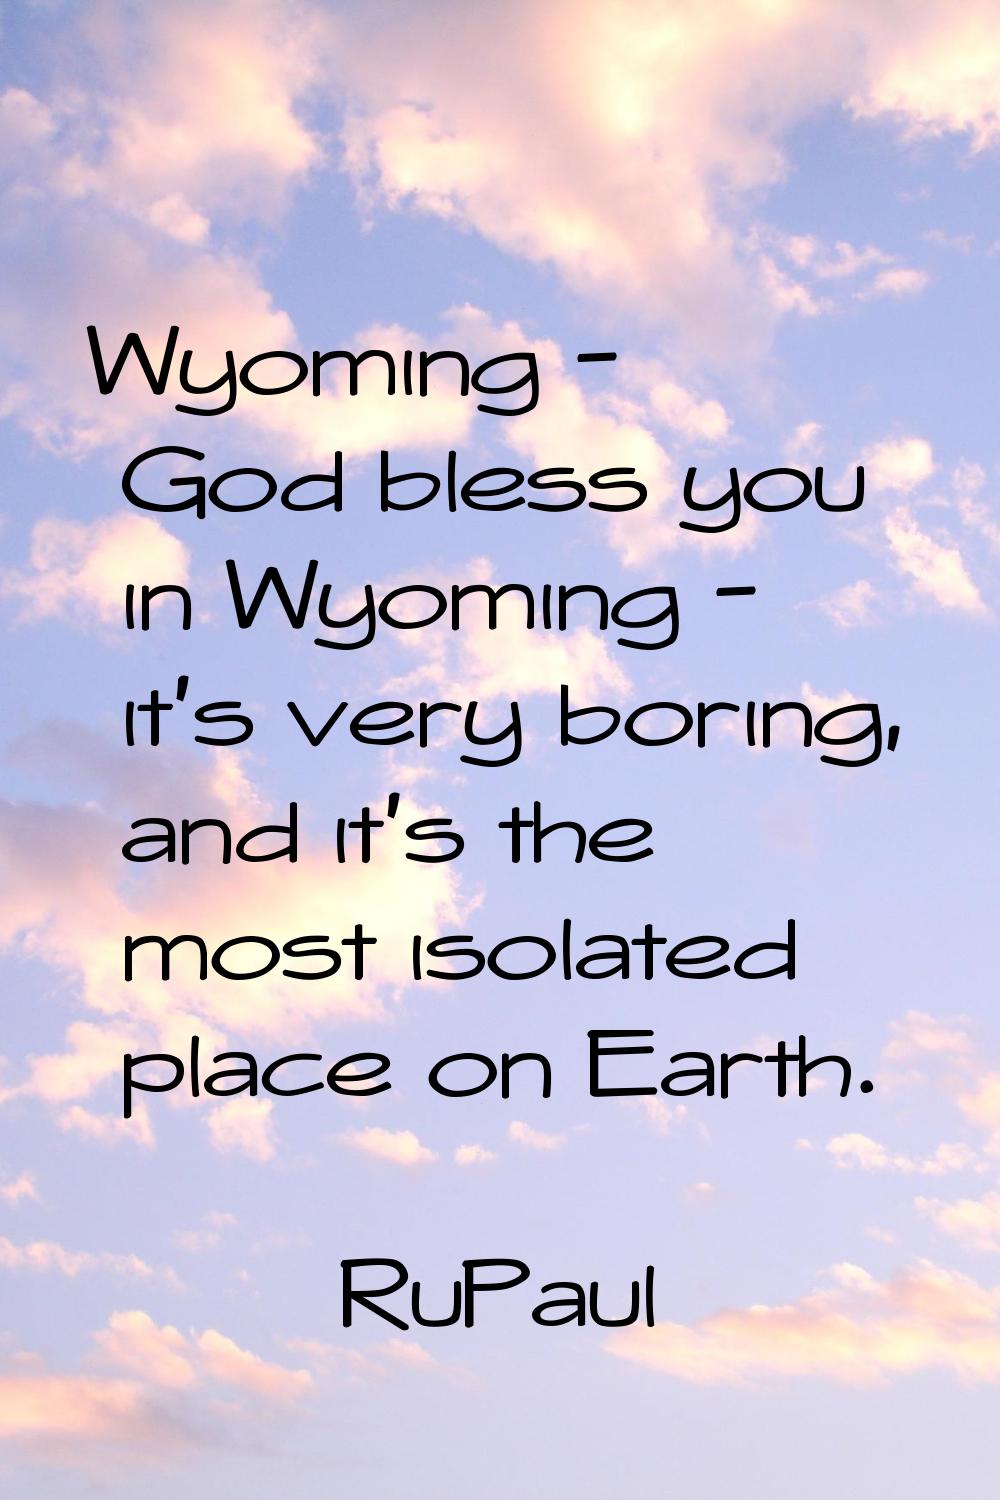 Wyoming - God bless you in Wyoming - it's very boring, and it's the most isolated place on Earth.